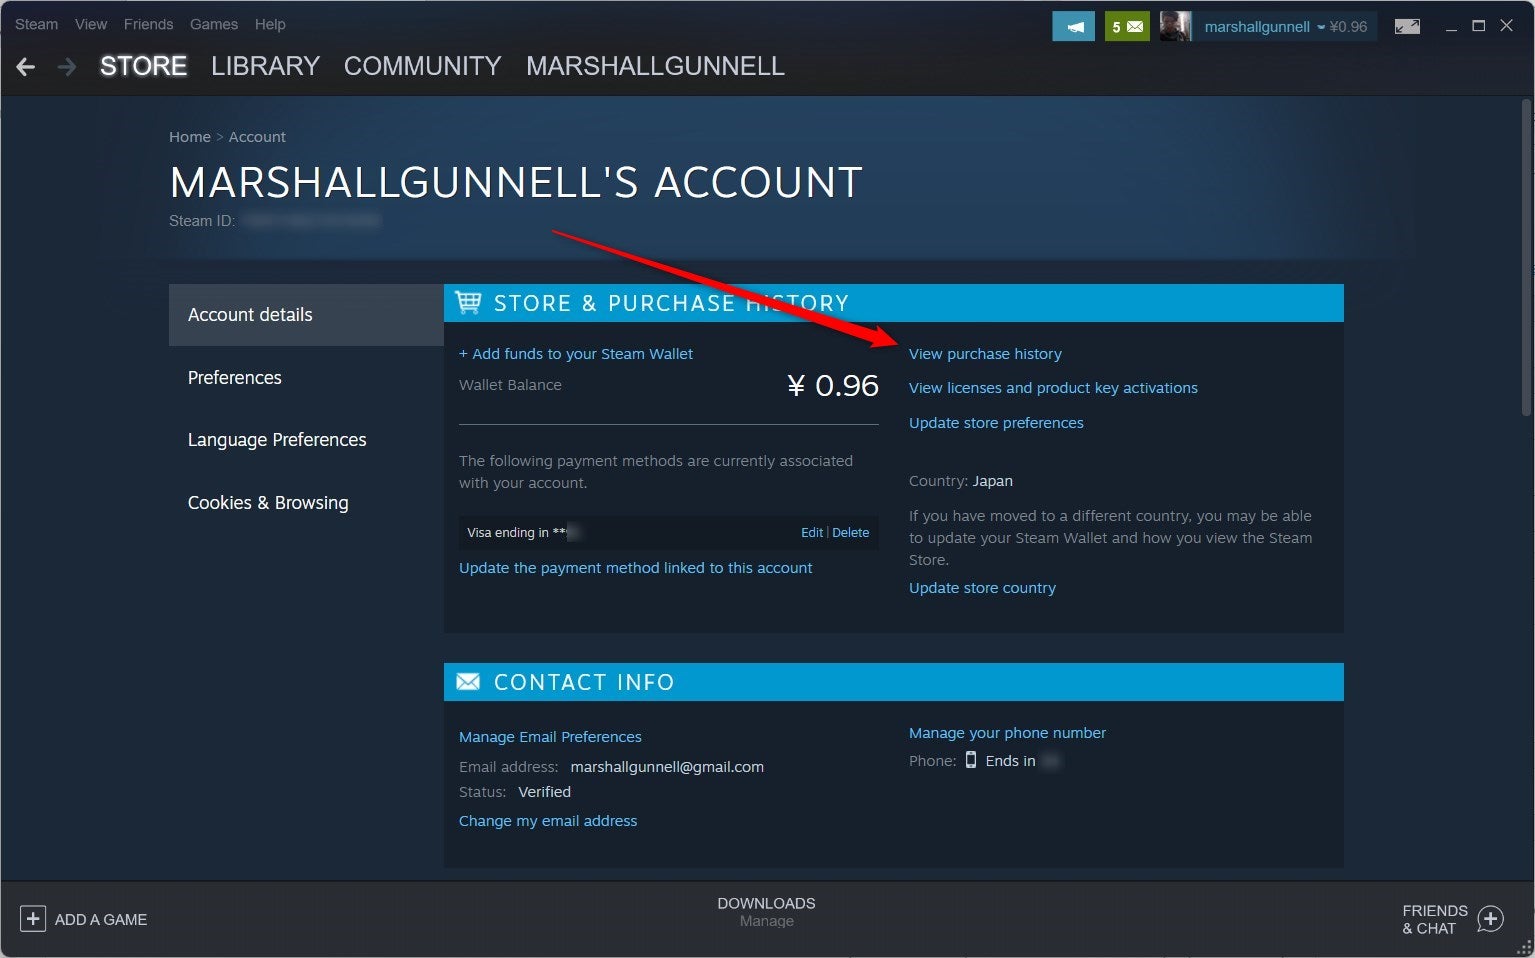 The View Purchase History option in the Steam client.